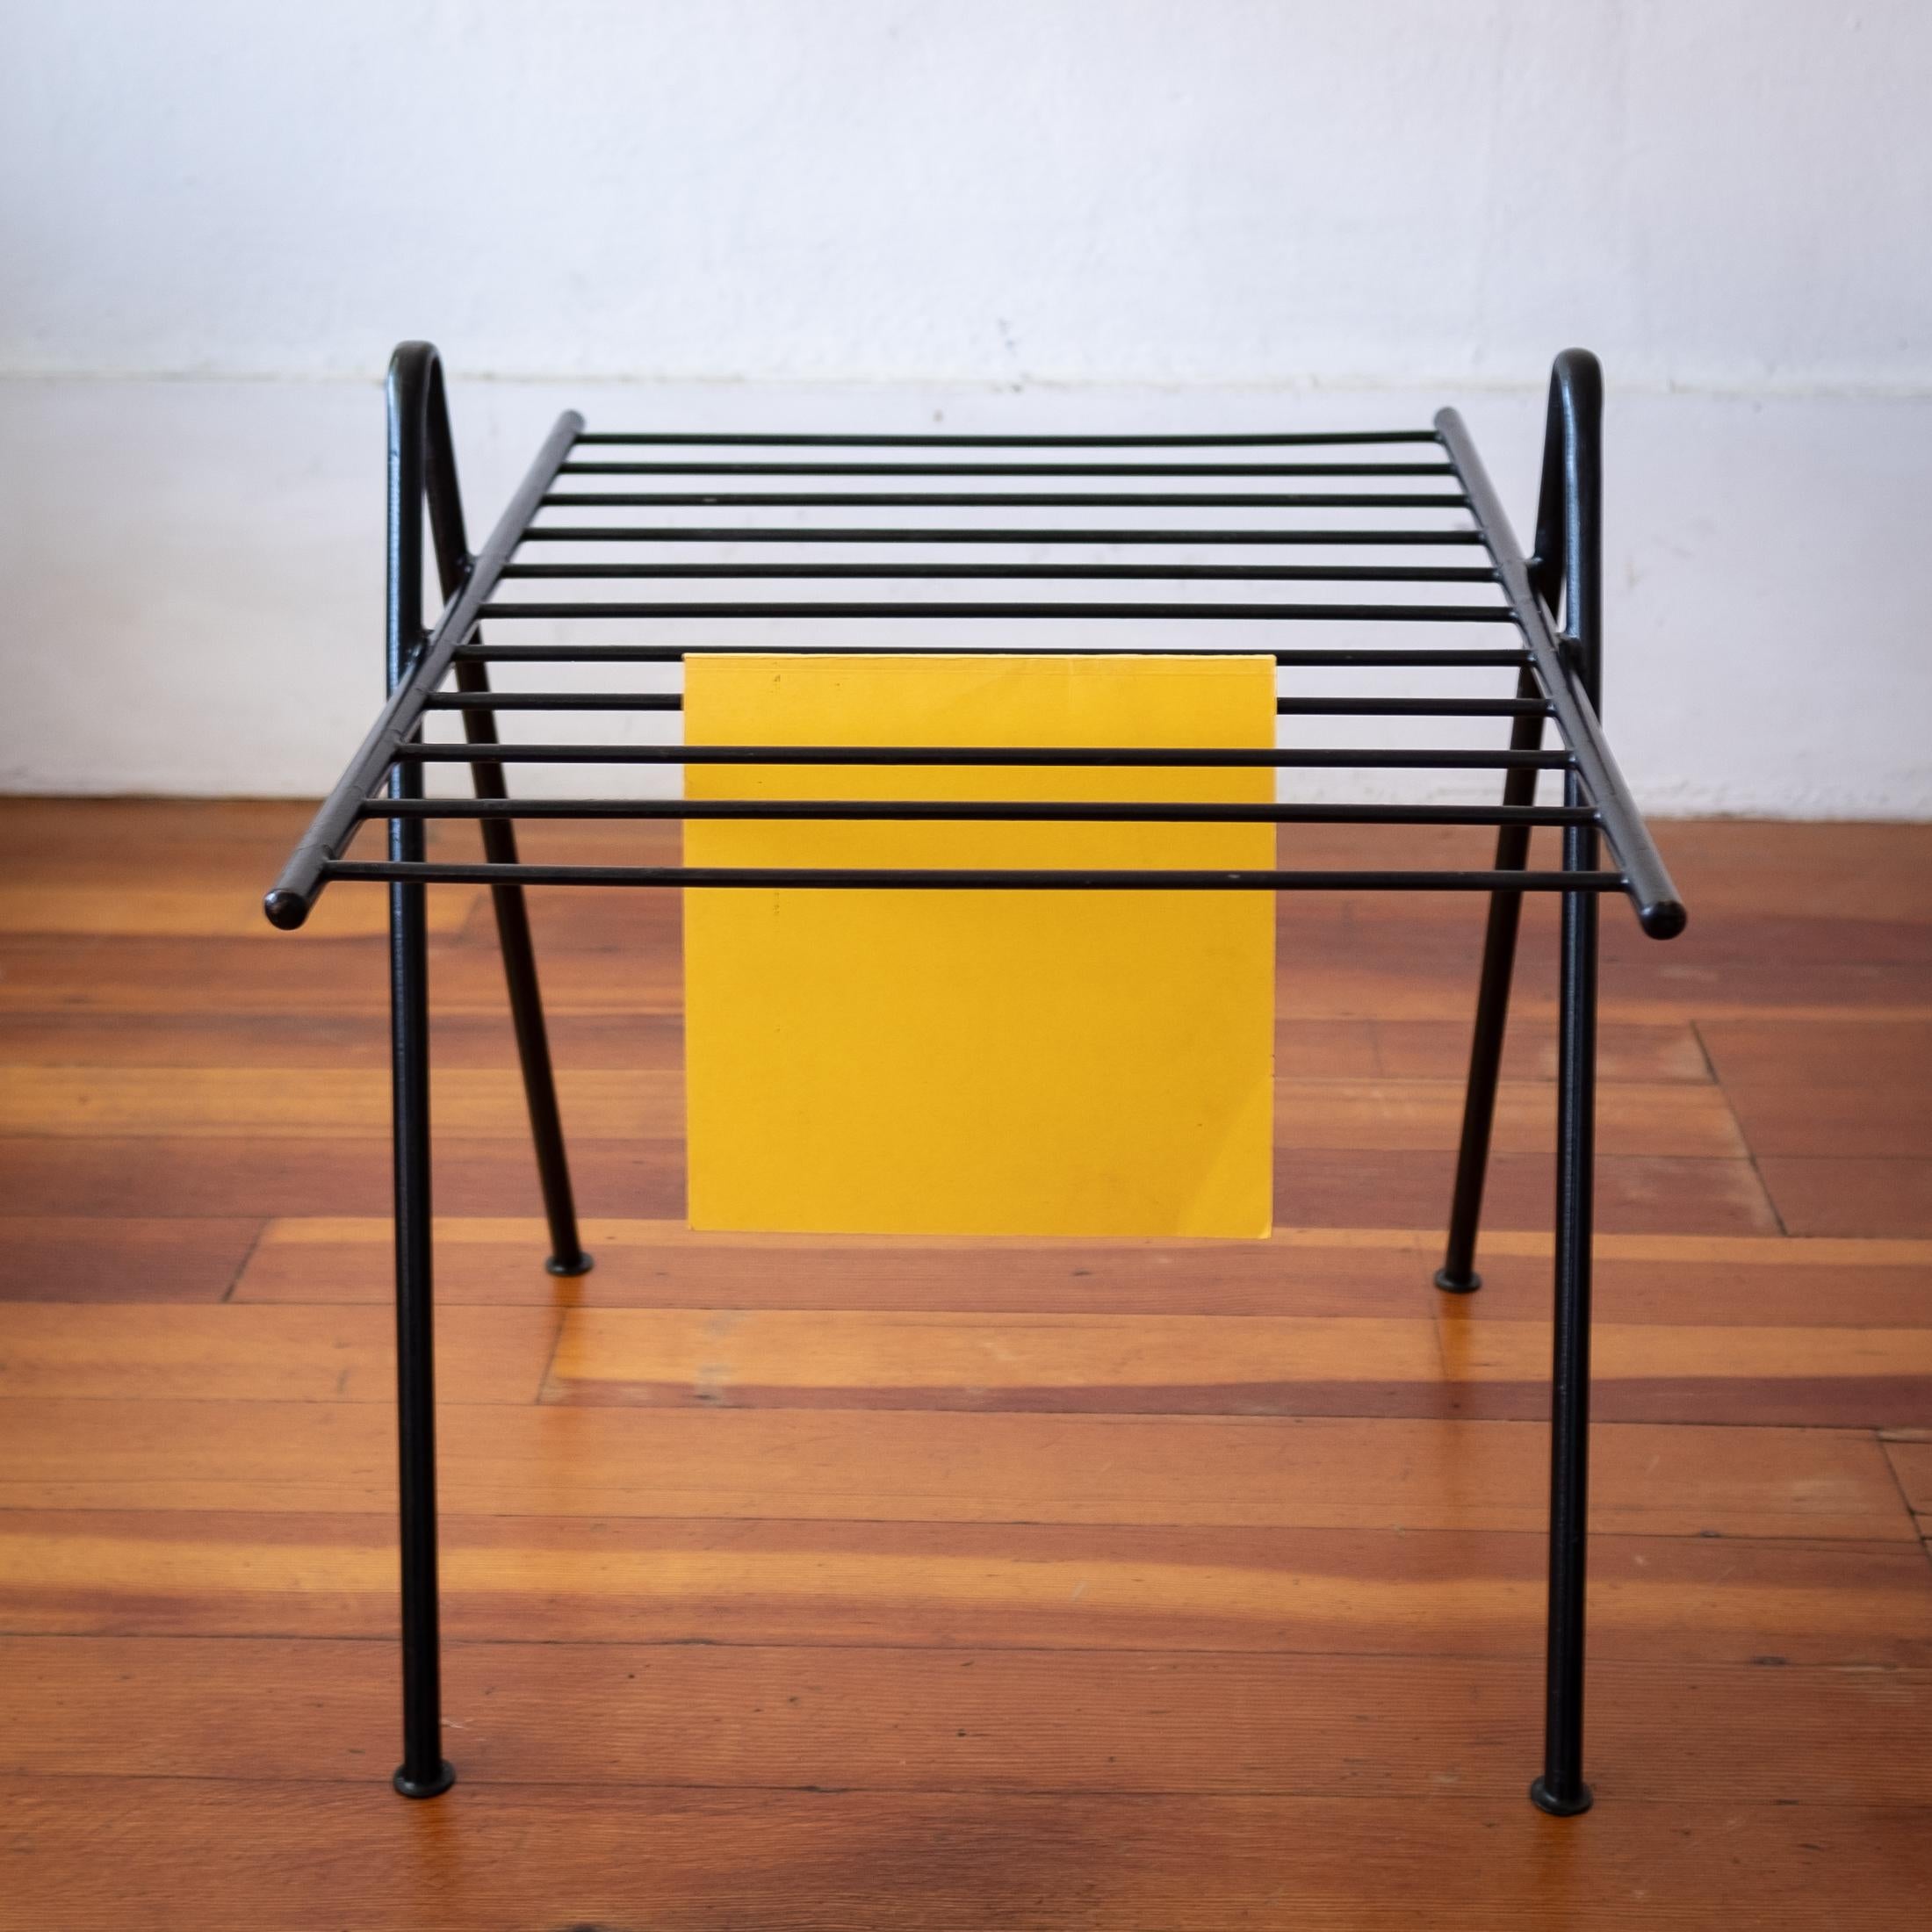 Midcentury Iron a Frame Table or Magazine Rack In Good Condition For Sale In San Diego, CA